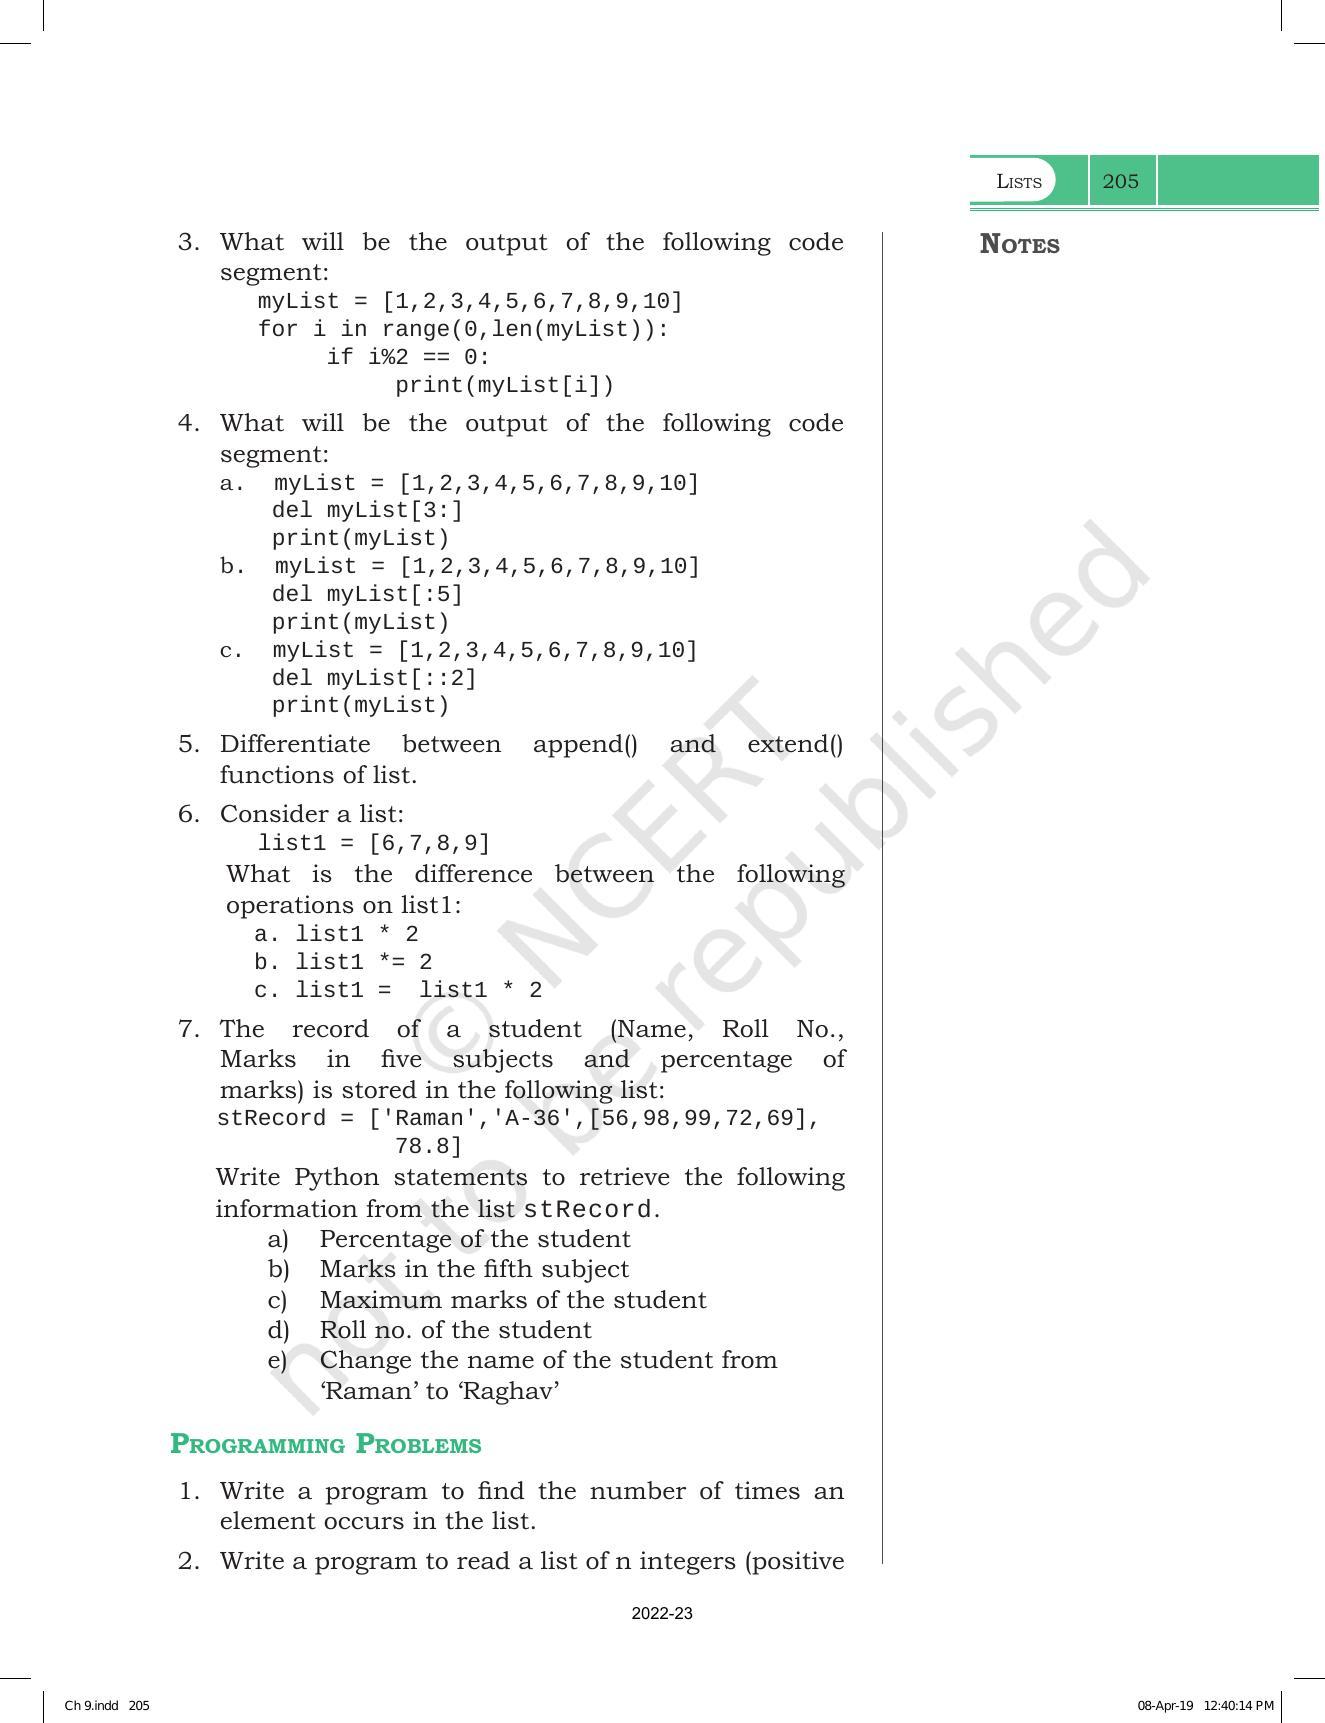 NCERT Book for Class 11 Computer Science Chapter 9 Lists - Page 17